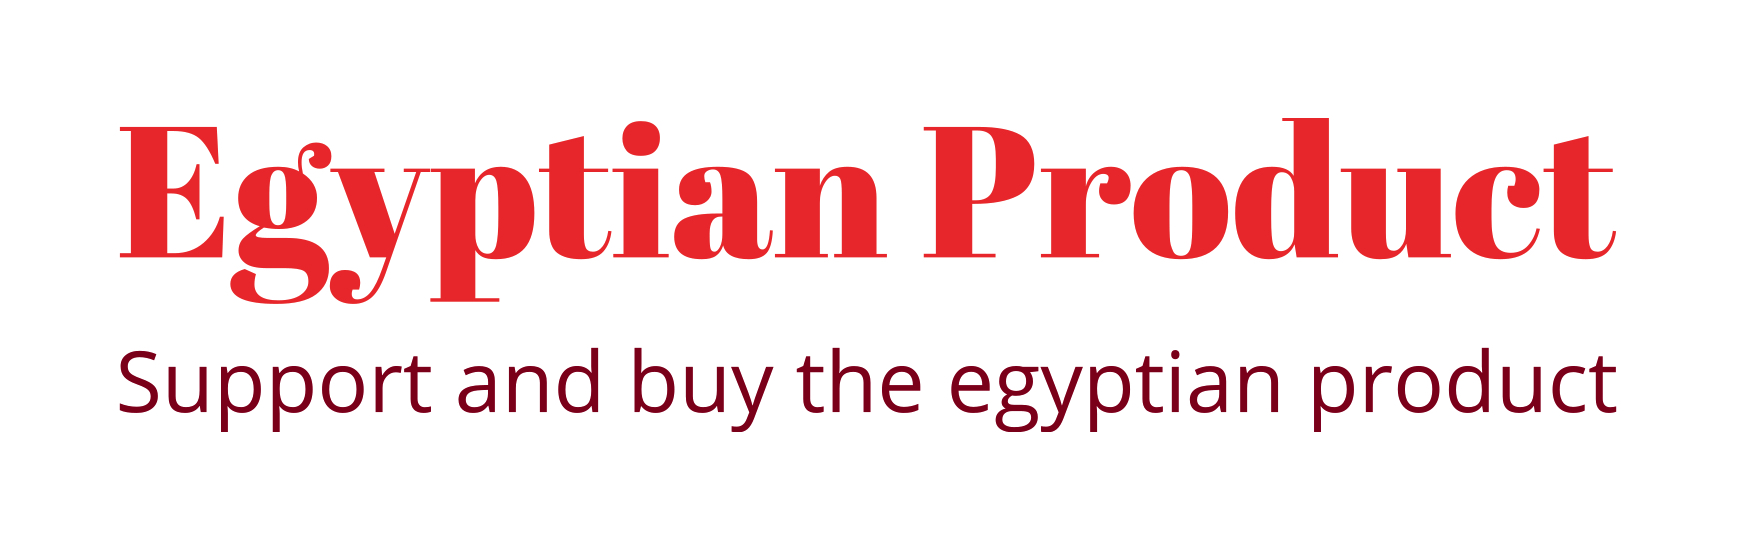 Egyptian Product